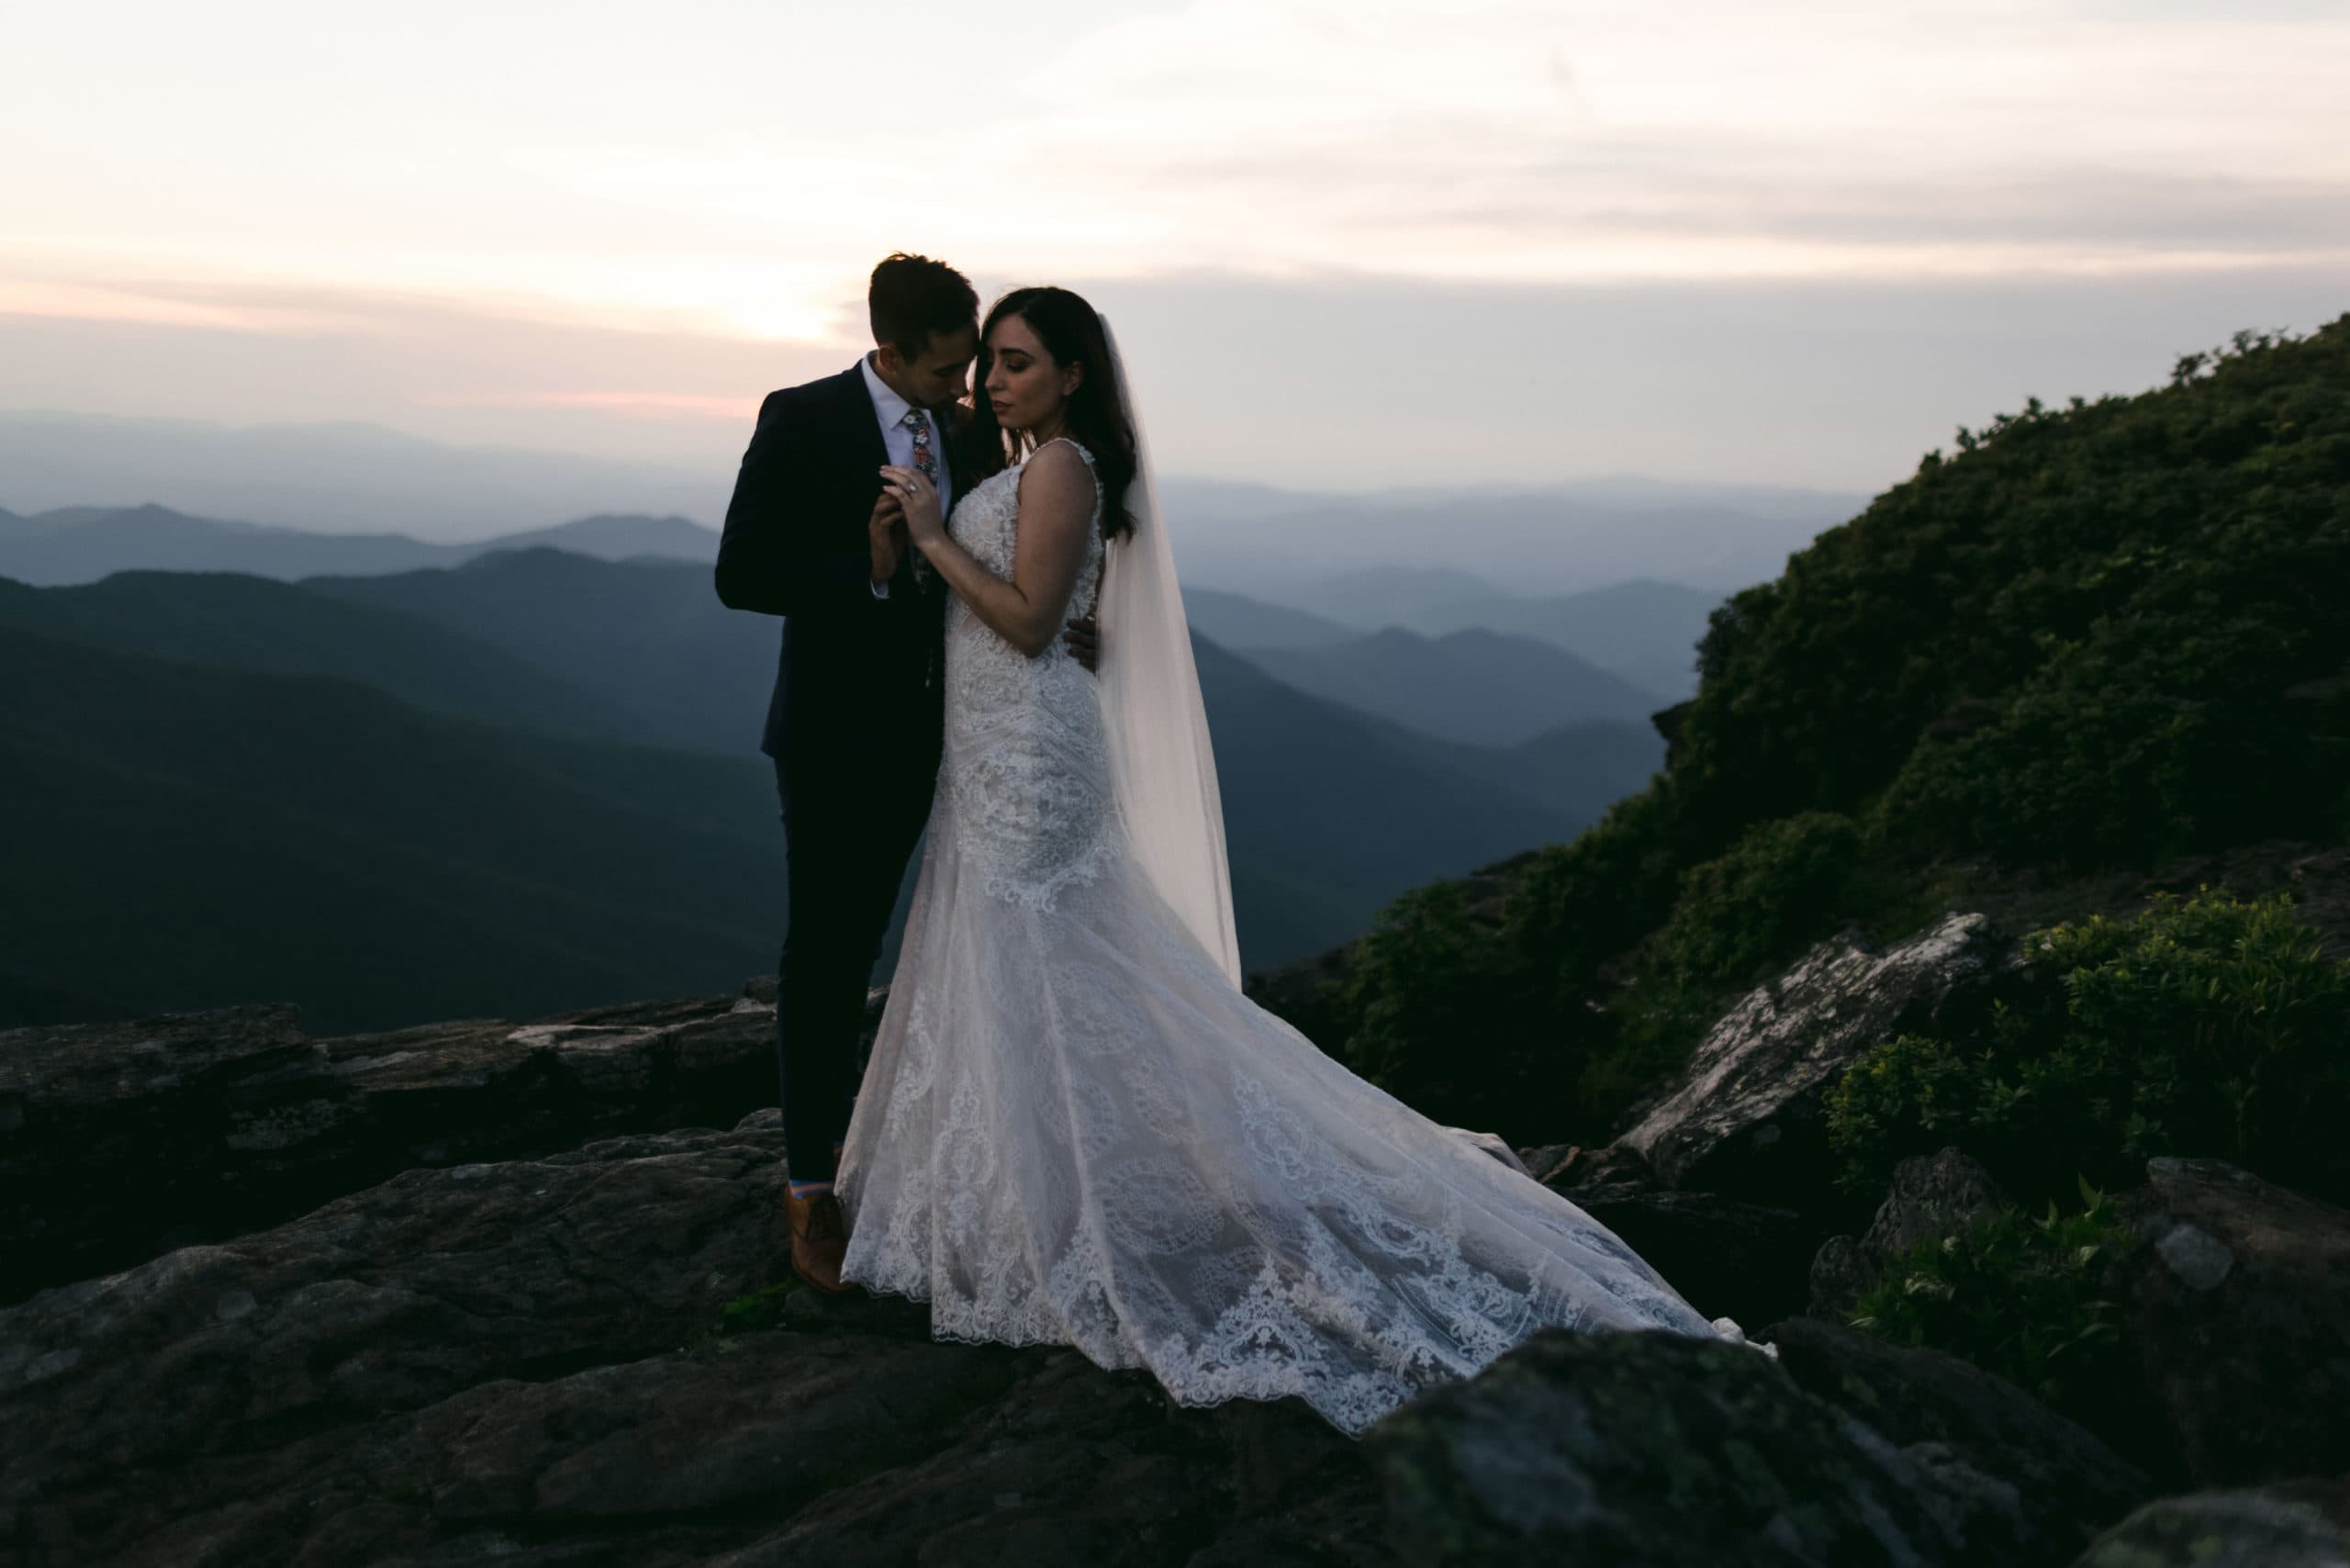 Bride and groom on a mountain after hiring their Colorado elopement photographer